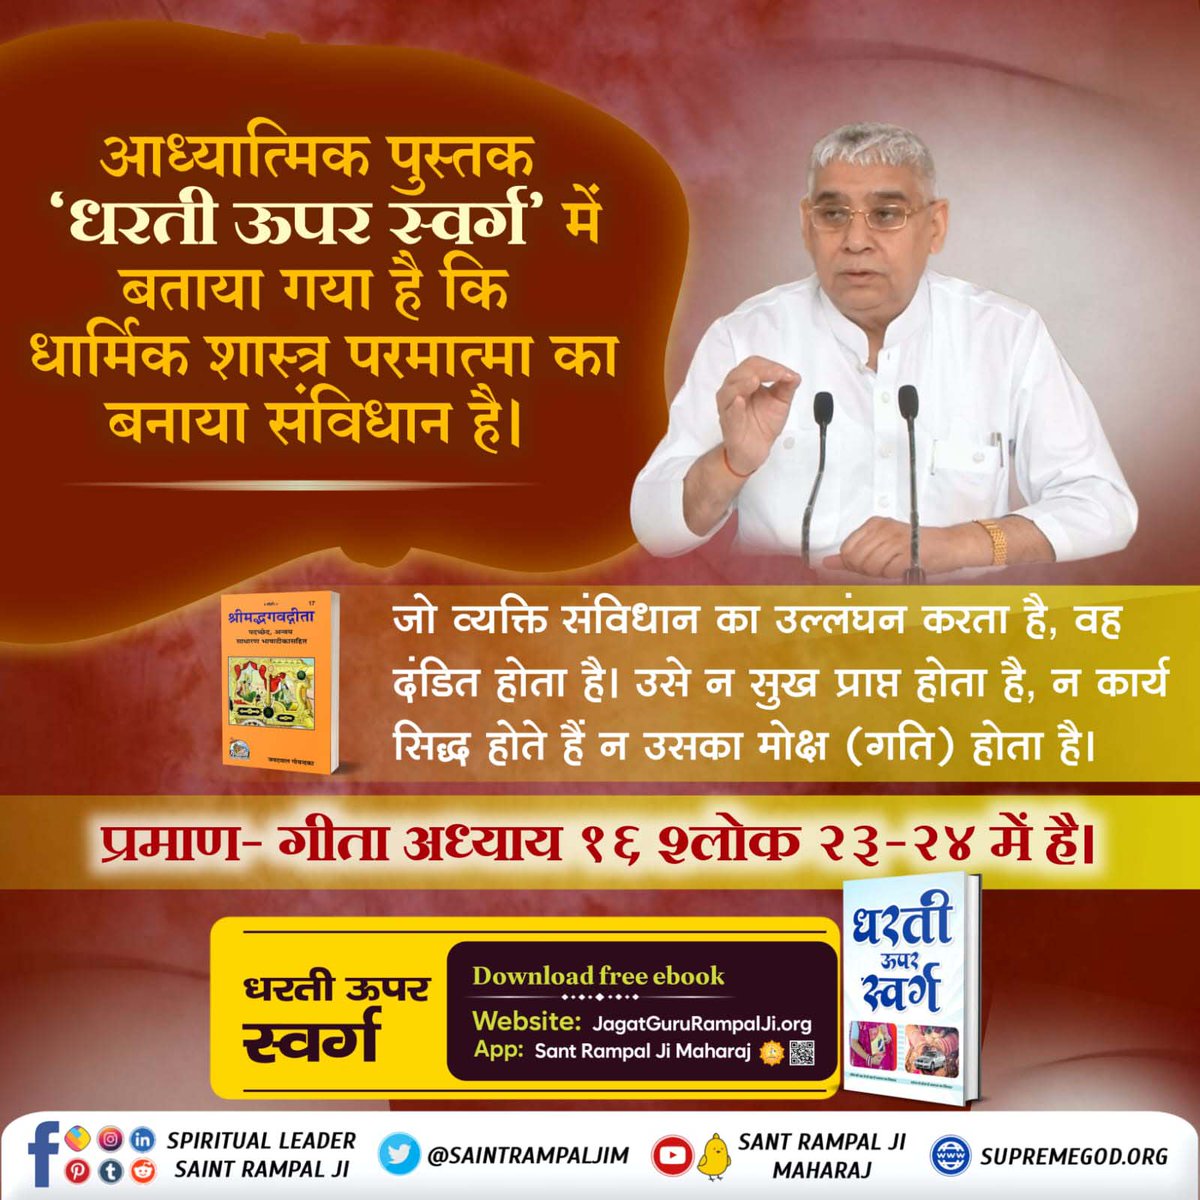 #धरती_को_स्वर्ग_बनाना_है
Through satsang, man comes to know the basic duty of life.
Man gives up all vices. There is a flood of happiness in his life, any kind of sorrow does not live.
Sant Rampal Ji Maharaj